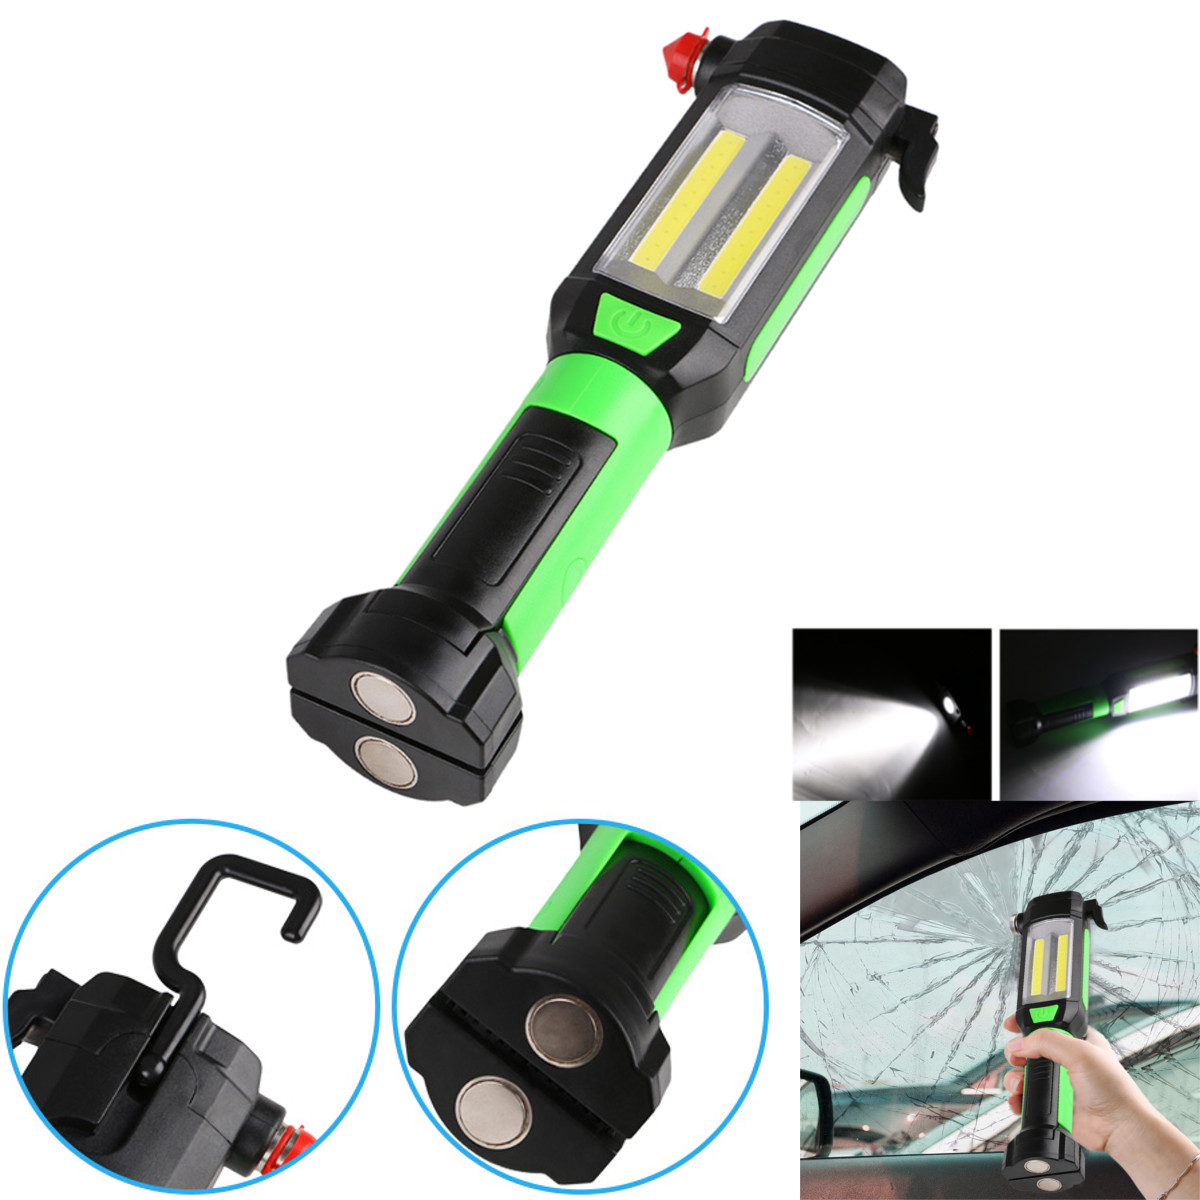 

XANES LF31 2COB+LED Portable Flashlight Work Light with Tactical Head Hidden Knife Magnetic Tail Hanging Clip Hook